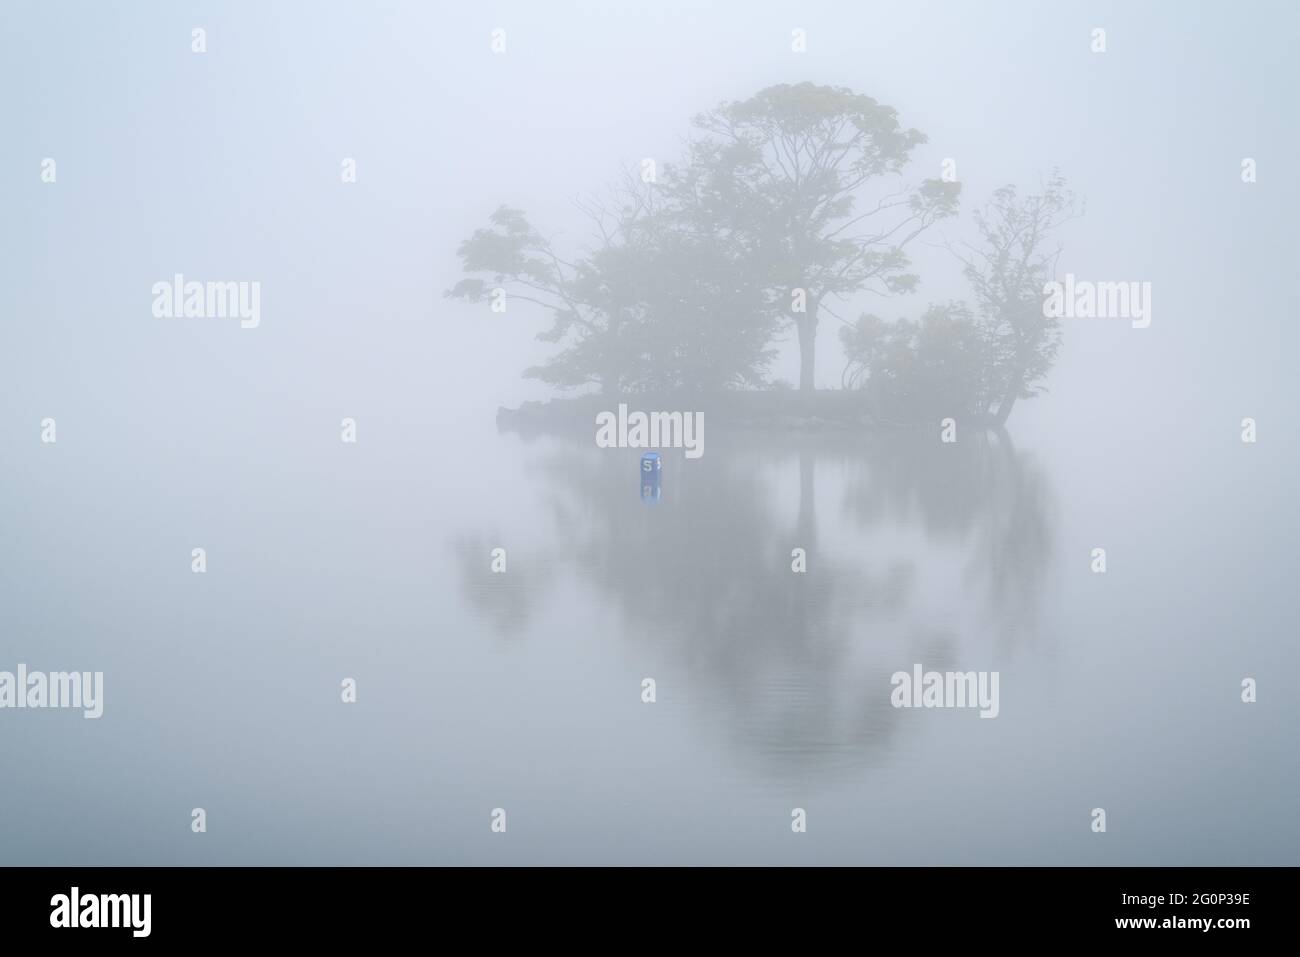 The small island on Yeadon Tarn (dam) is isolated by thick fog on a late spring morning, creating a minimalist scene reflected in the calm water. Stock Photo